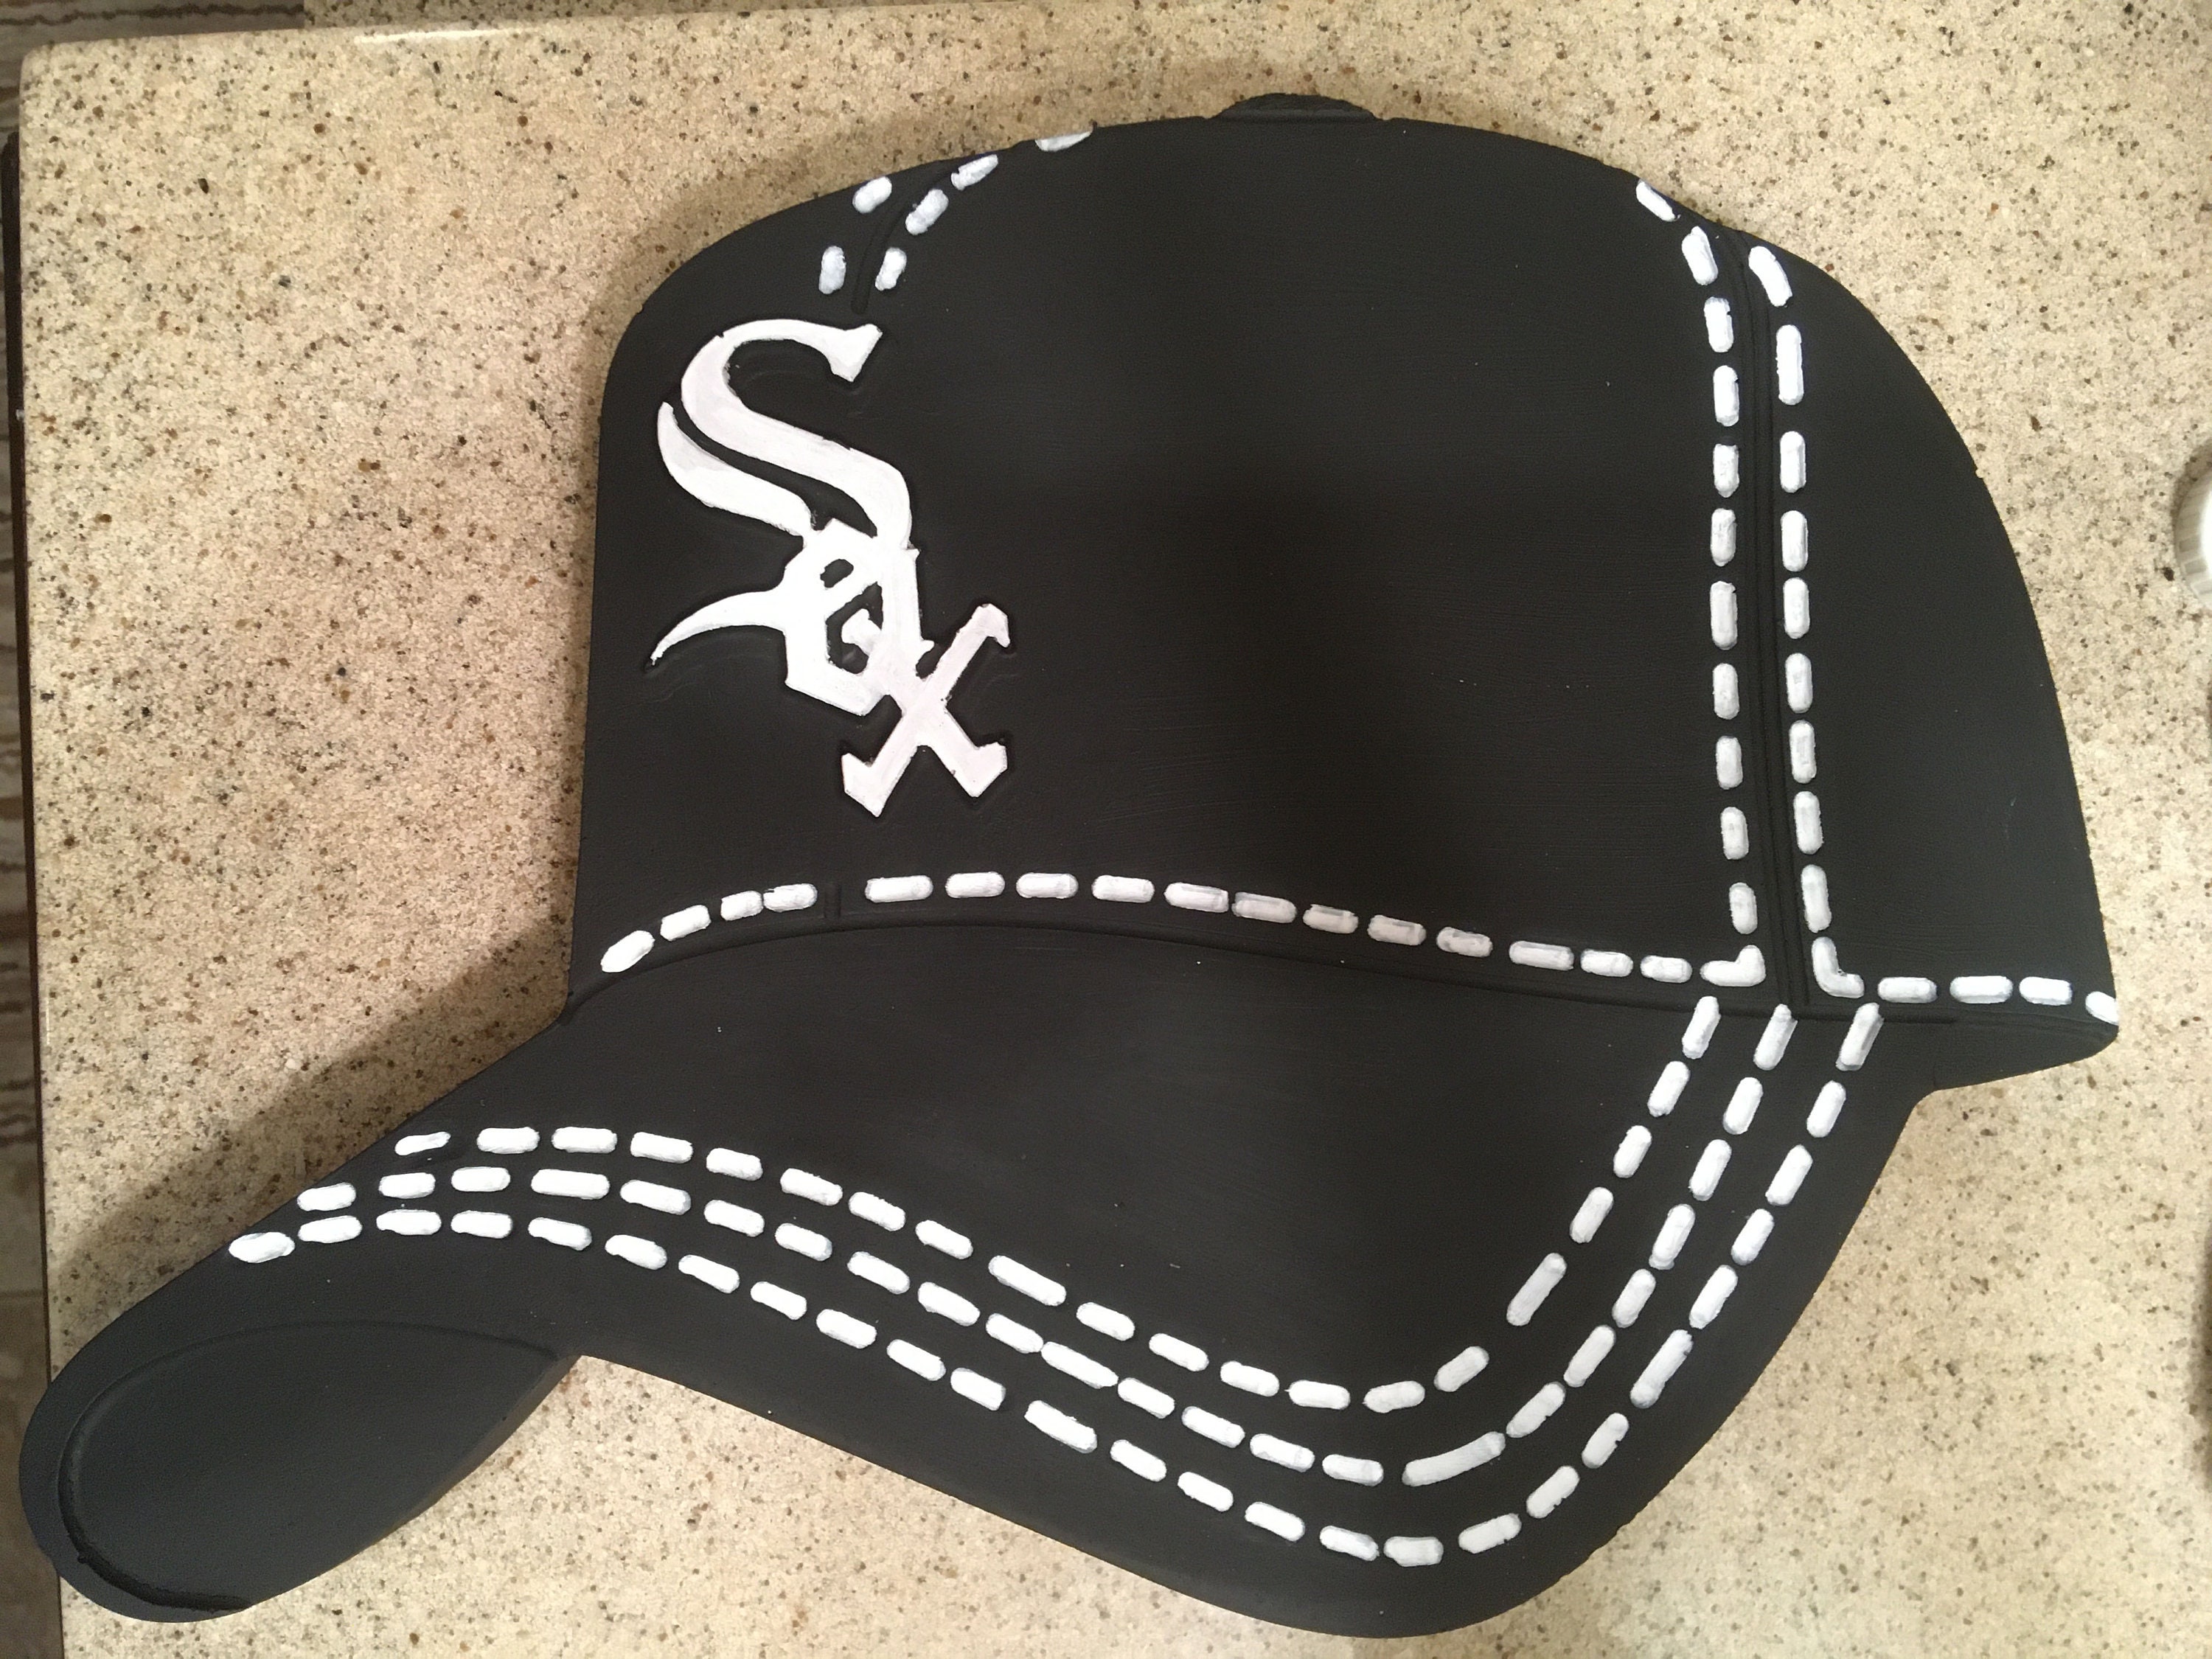 Chicago White Sox: Fans' stories of South Side pride